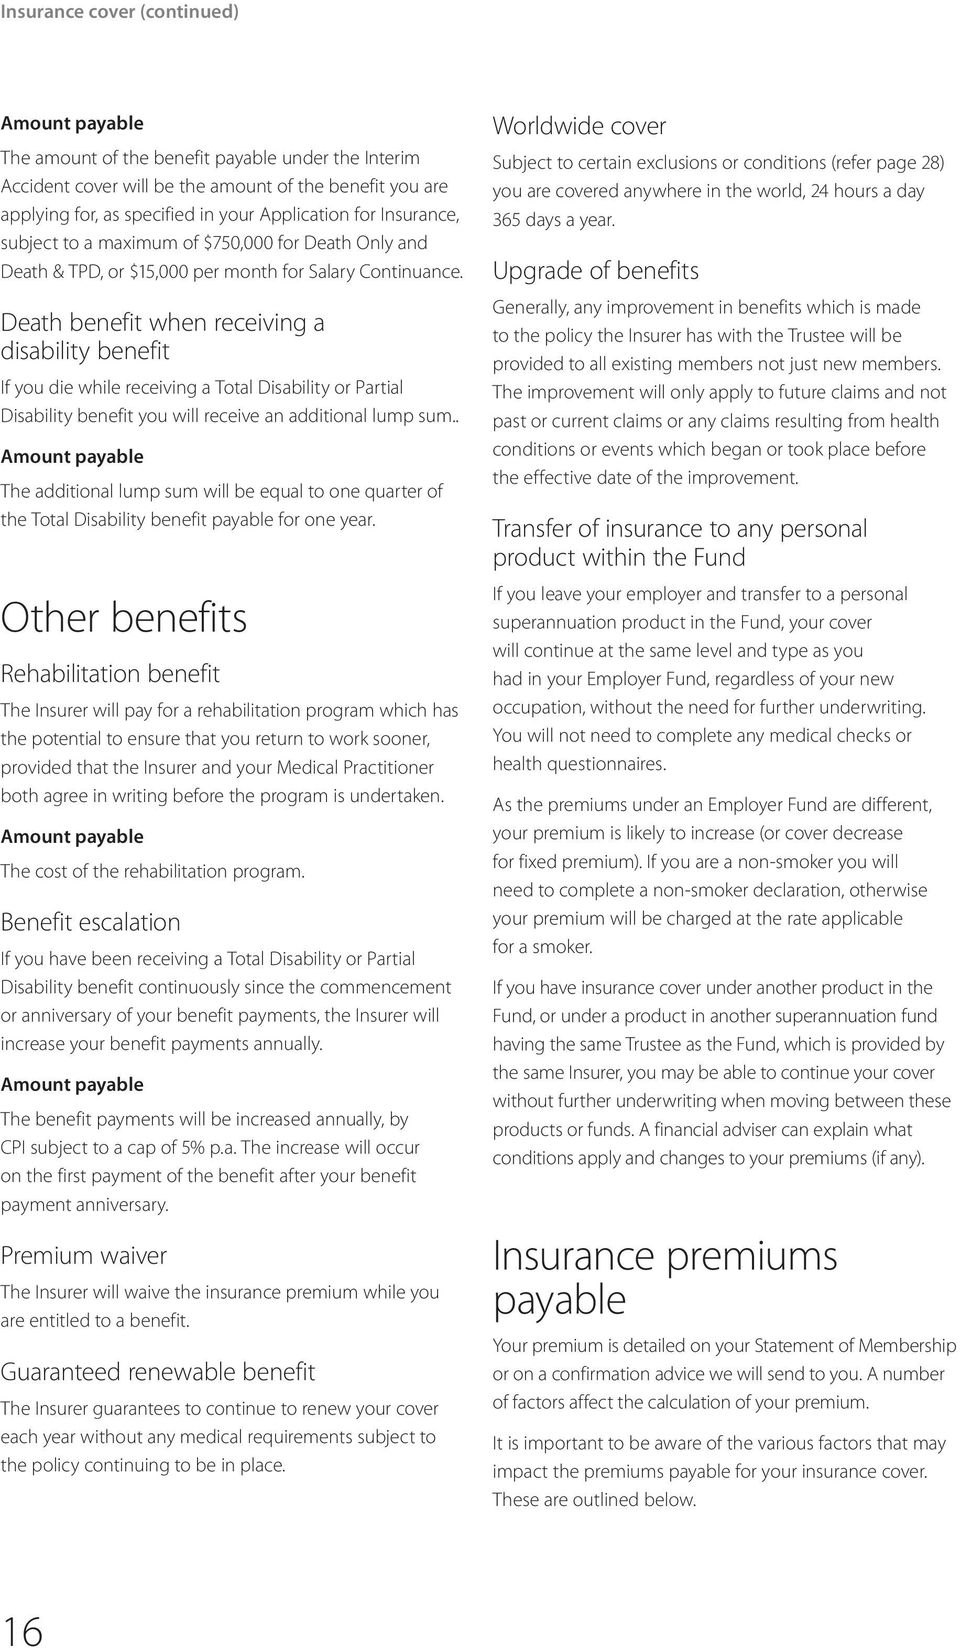 Death benefit when receiving a disability benefit If you die while receiving a Total Disability or Partial Disability benefit you will receive an additional lump sum.